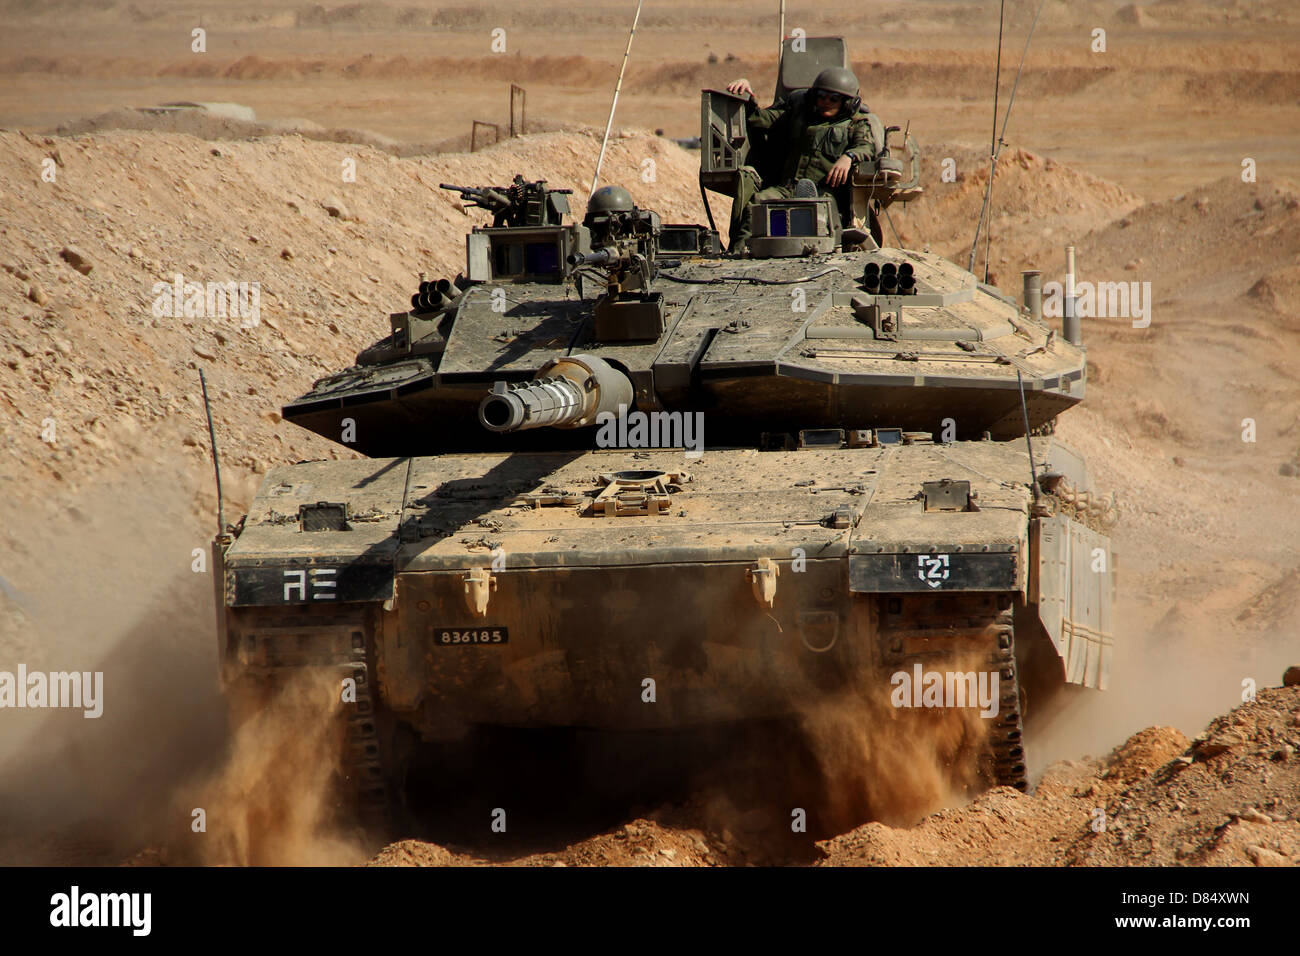 An Israel Defense Force Merkava Mark IV main battle tank. Note the instructor's chair fitted on board the tank's turret Stock Photo